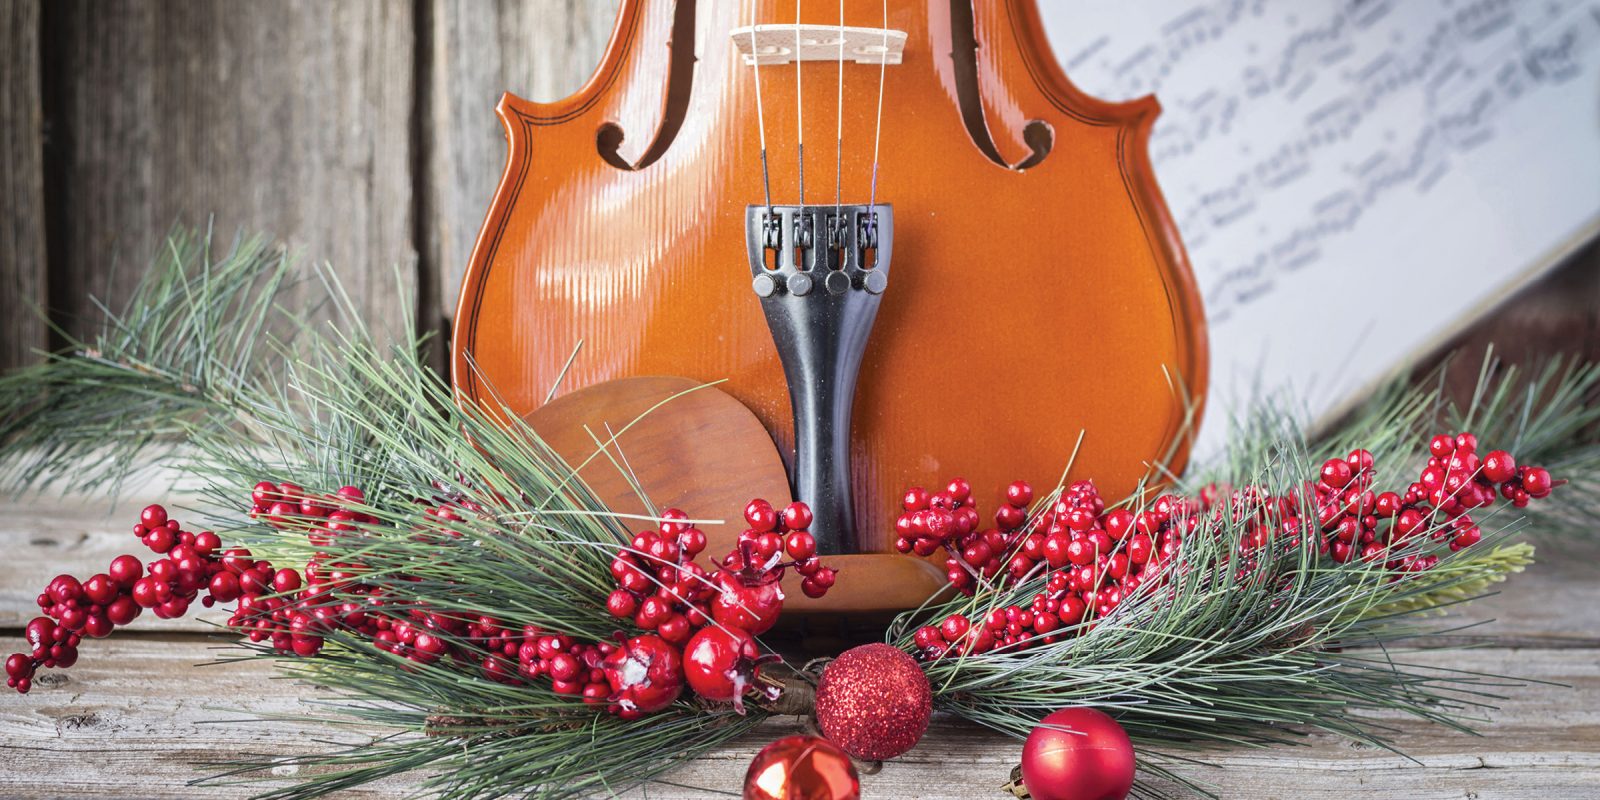 The bottom half of a violin with sheet music, pine, and cranberries adorning the front of the fiddle on rustic wood background. Photo Credit: Adobe Stock Image